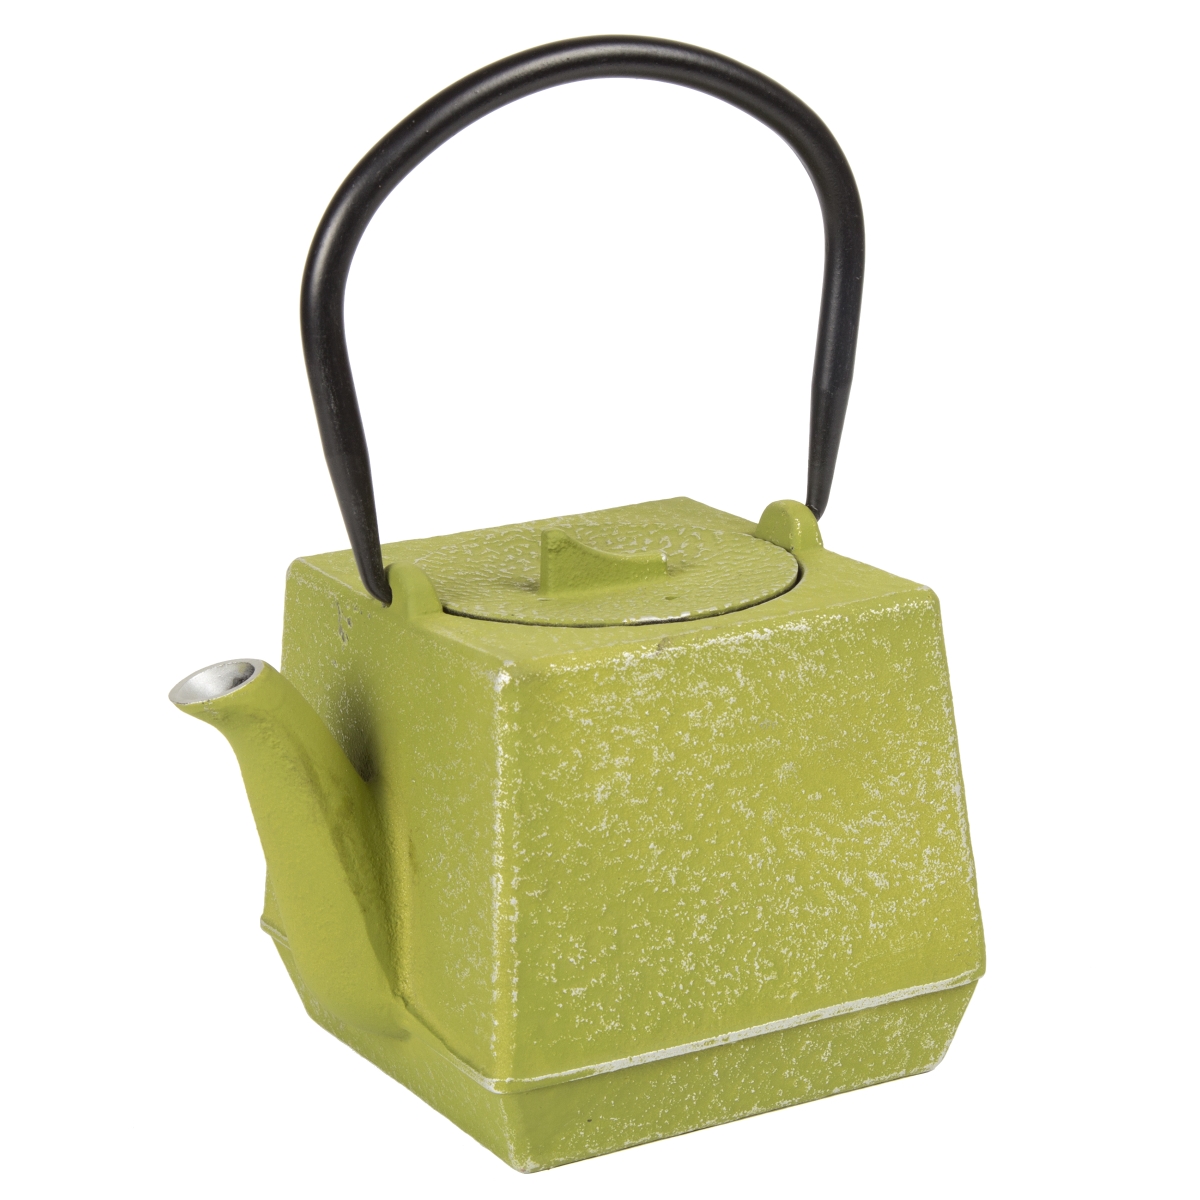 Picture of Creative Home  73516 Creative Home 28 oz Cast Iron Tea Pot with Removable Stainless Steel Infuser Basket, Green Color,